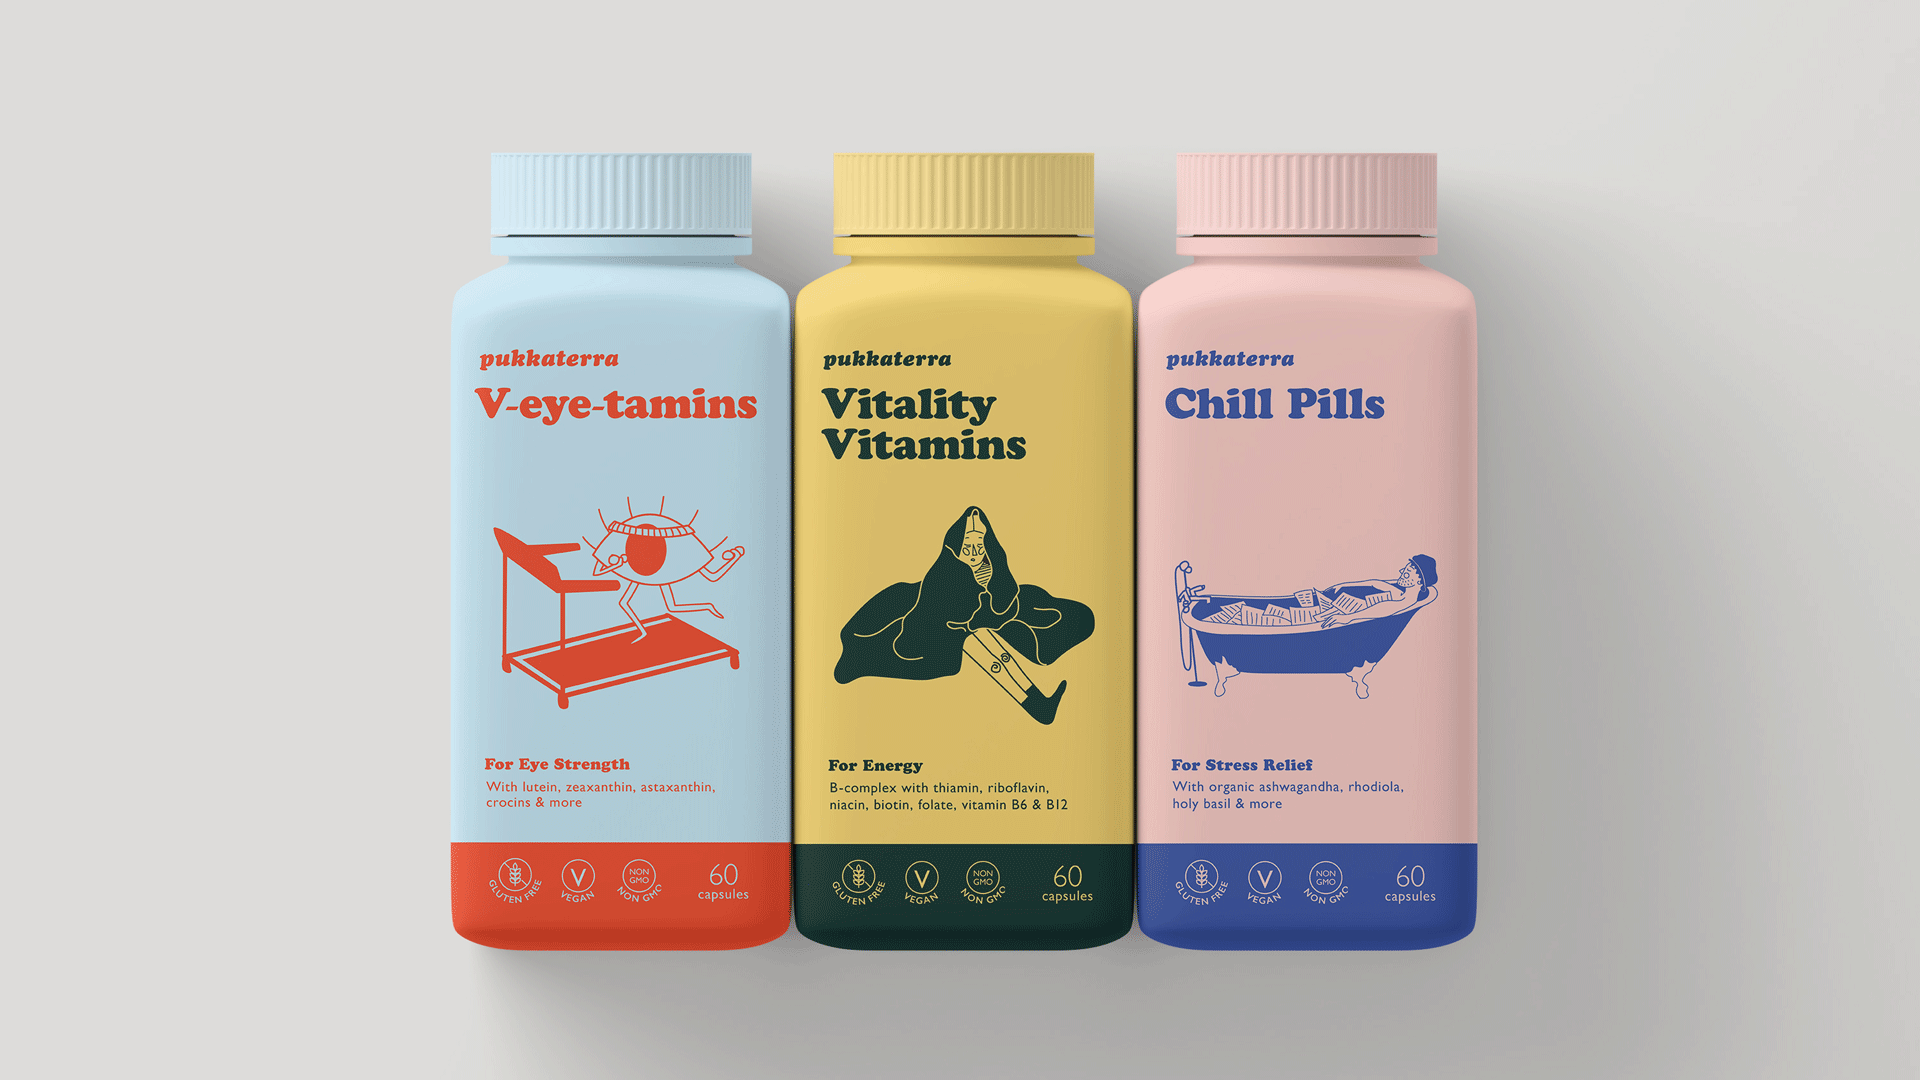 Three colourful vitamin bottles with unique illustrations on each. V-eye-tamins has an illustration of an eye on a treadmill. Vitality Vitamins has an illustration of a person wrapped in a blanket. Chill Pills illustrates someone drowning in their homework.